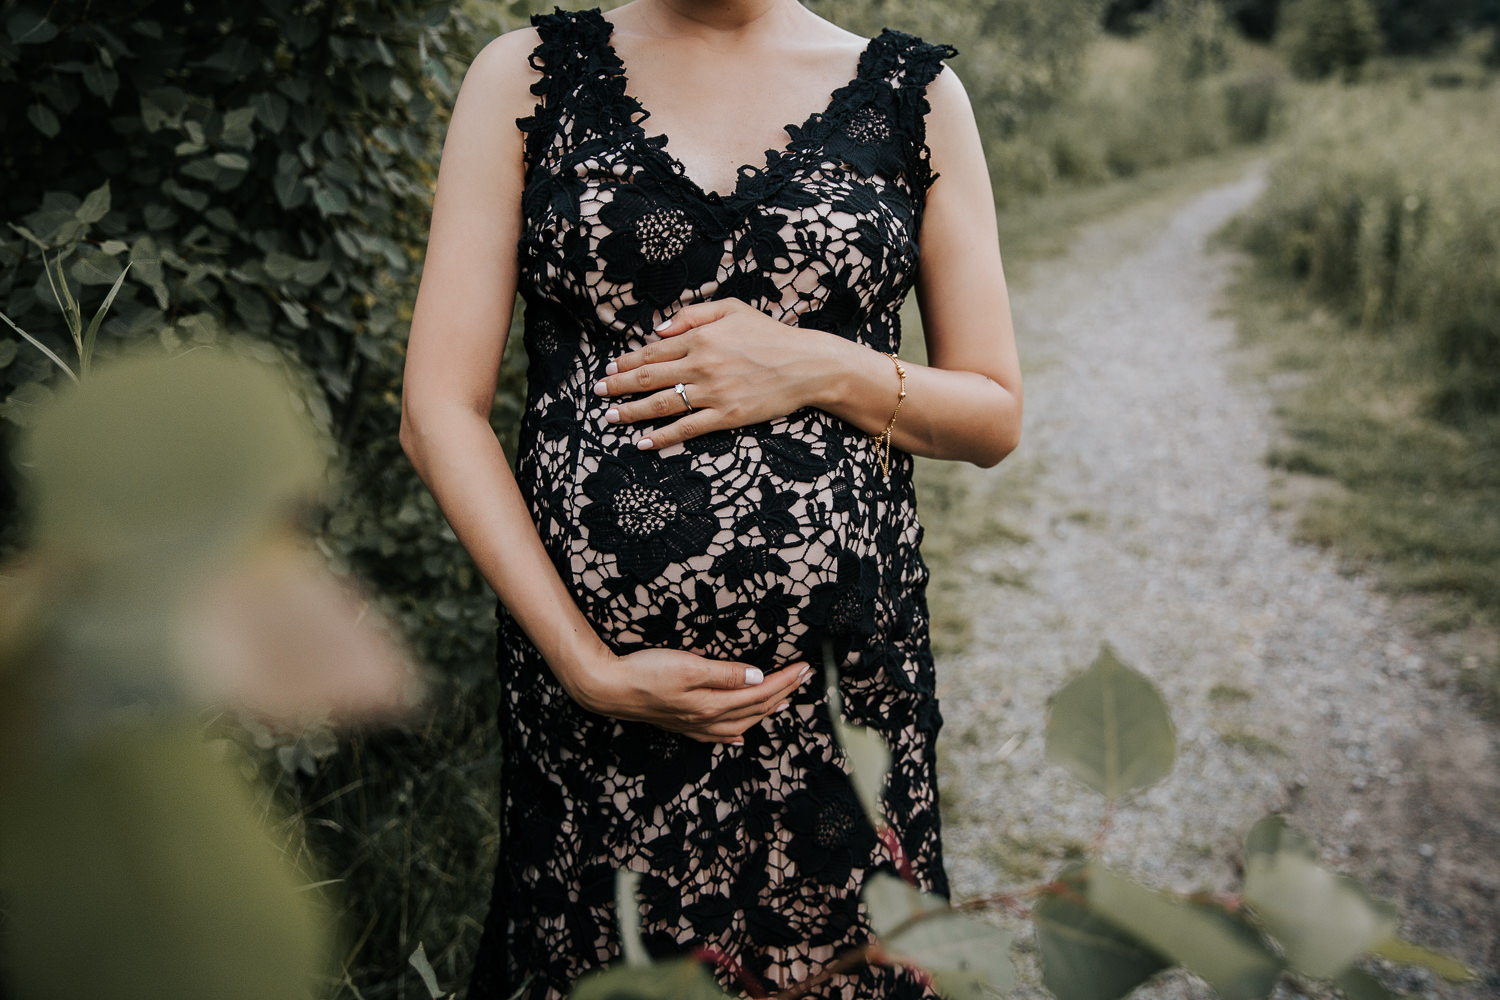 7 month pregnant woman with dark hair wearing black lace and blush gown standing next to green foliage, holding baby bump -​​​​​​​ Newmarket In-Home Photography